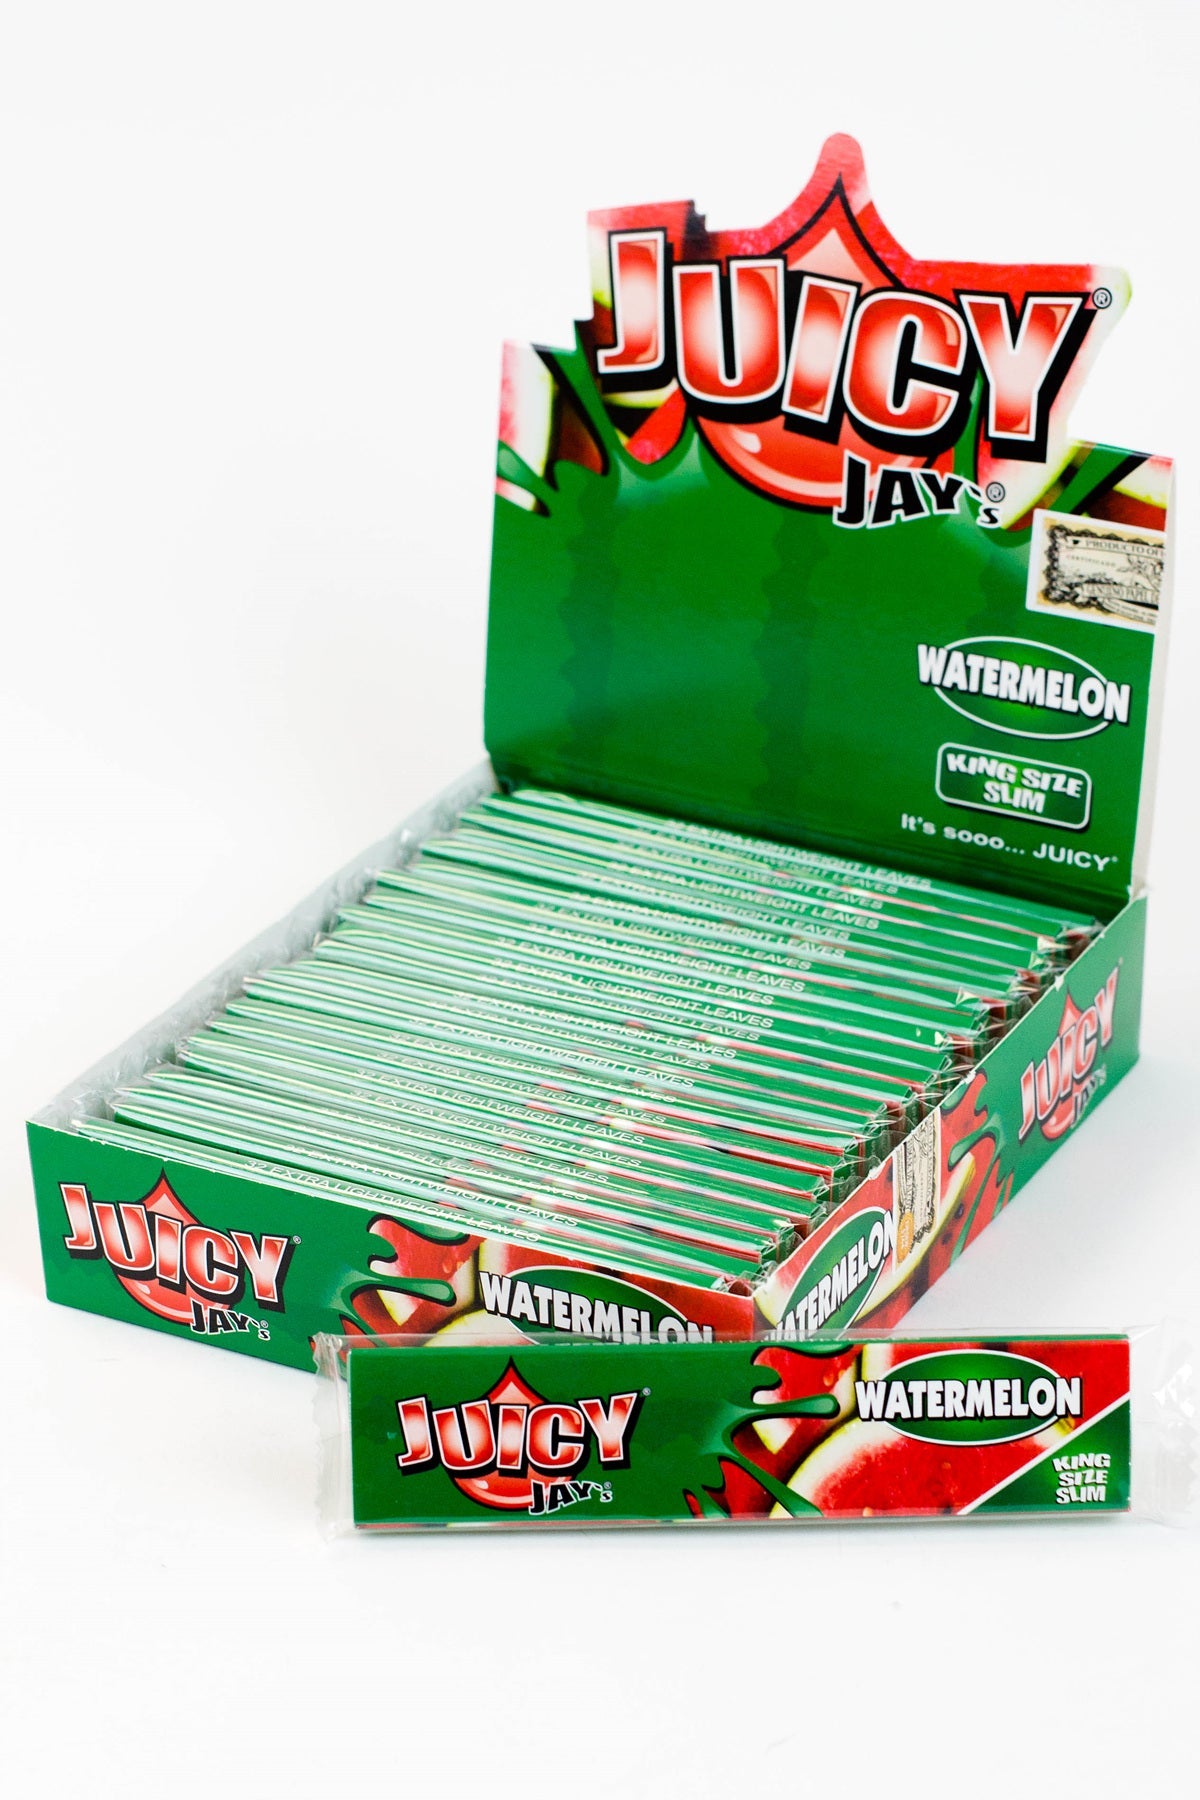 Juicy Jay's King Size Rolling Papers_6